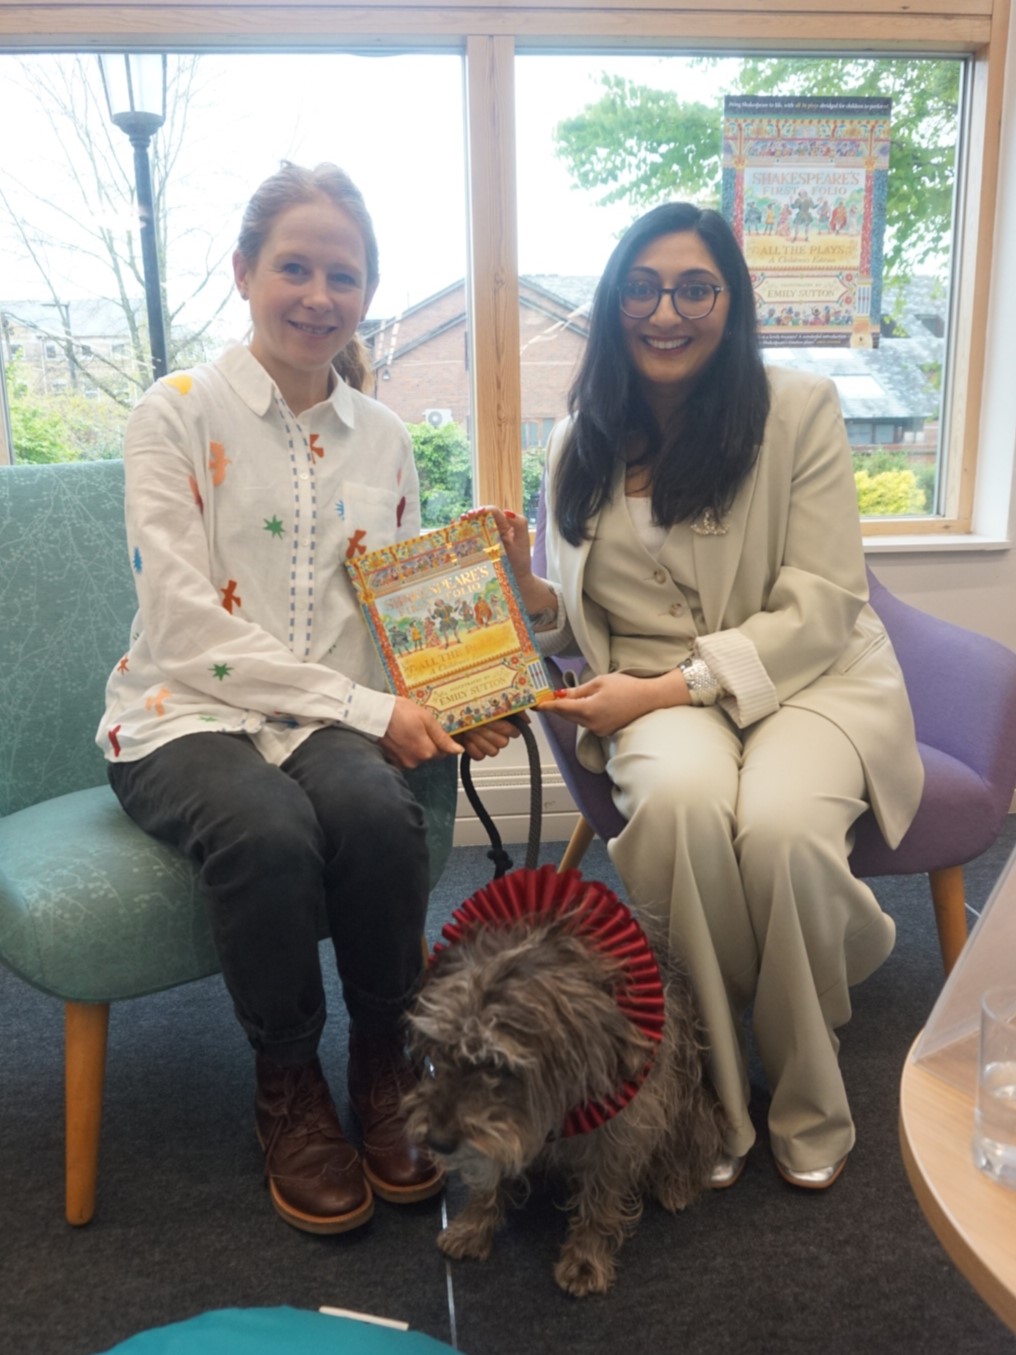 Photo (from left to right): Illustrator Emily Sutton and Dr Anjna Chouhan with their new children’s book “Shakespeare's First Folio: All The Plays”.